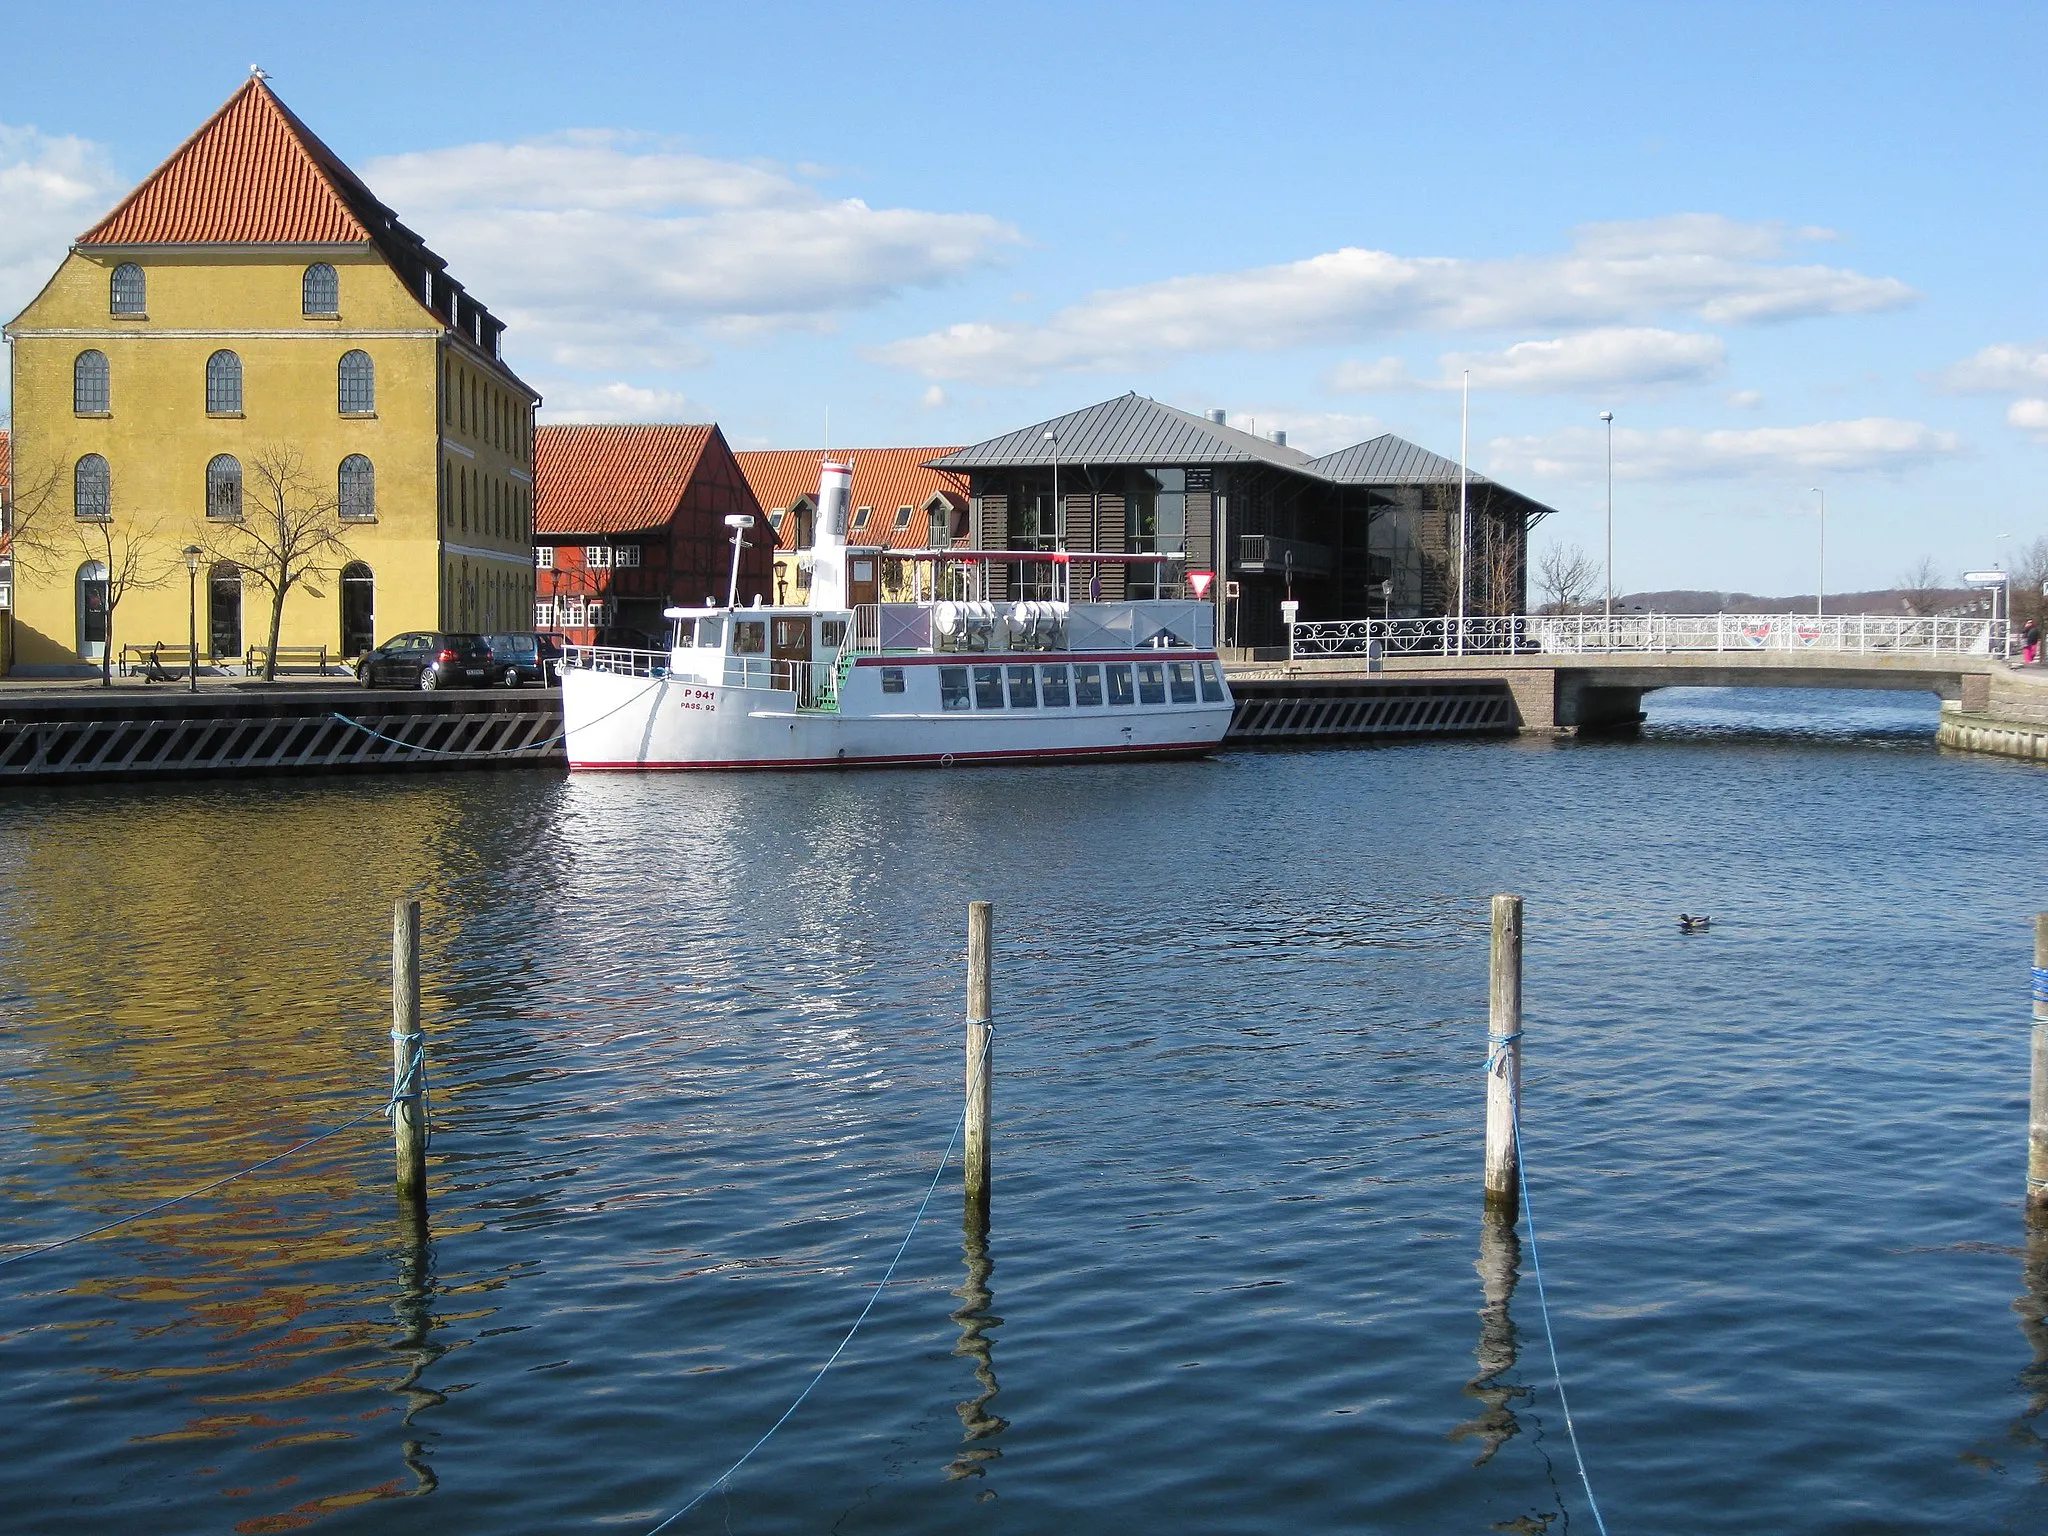 Photo showing: The habour of the town Skælskør. The town is located in West Zealand, Denmark.